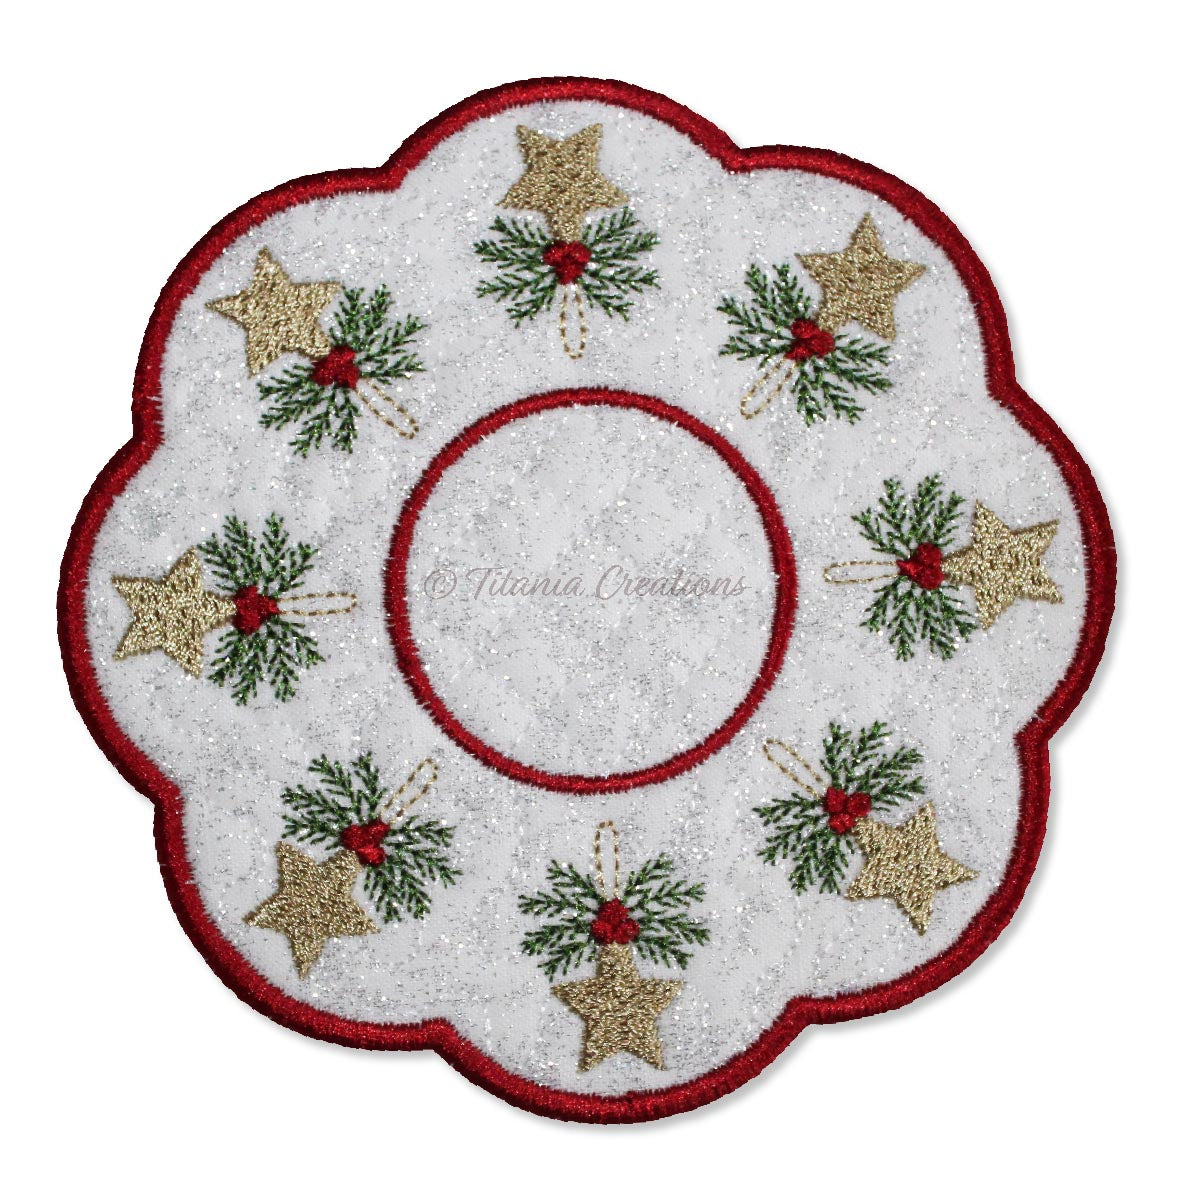 ITH Christmas Star Candle Mat 5x5 6x6 7x7 8x8